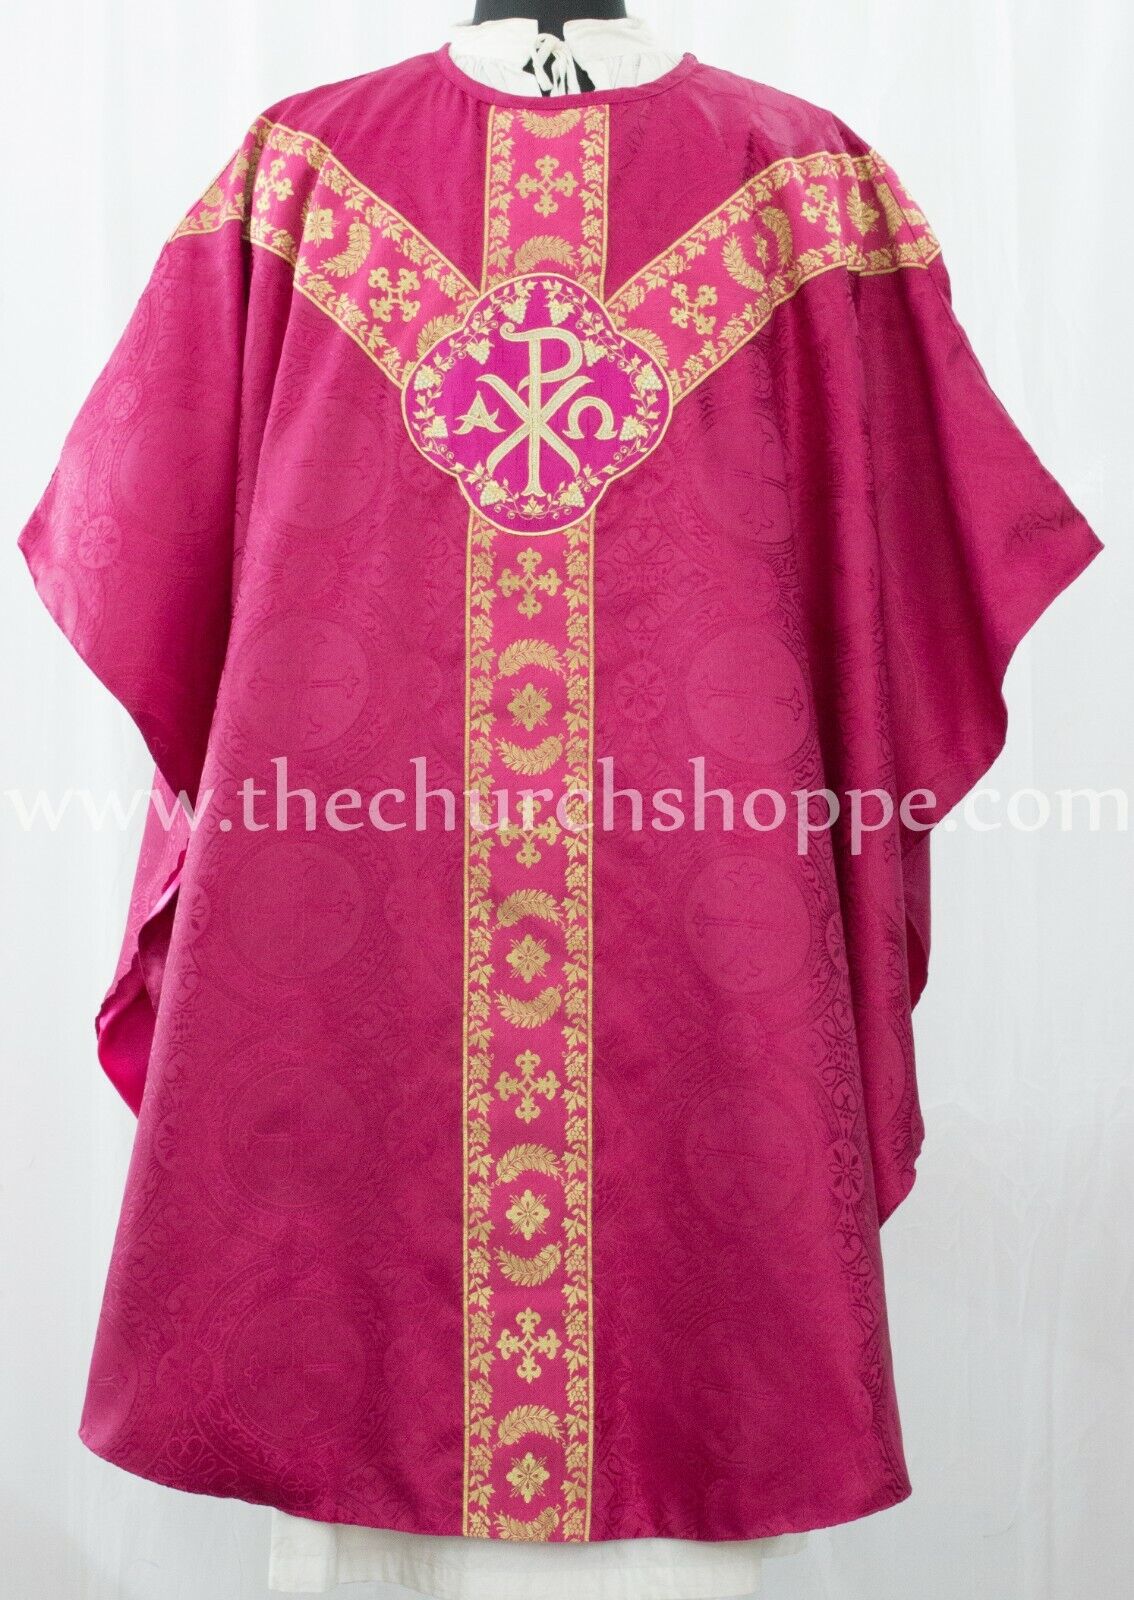 DARK ROSE GOTHIC CHASUBLE vestment and mass & stole set casula casel casulla,IHS